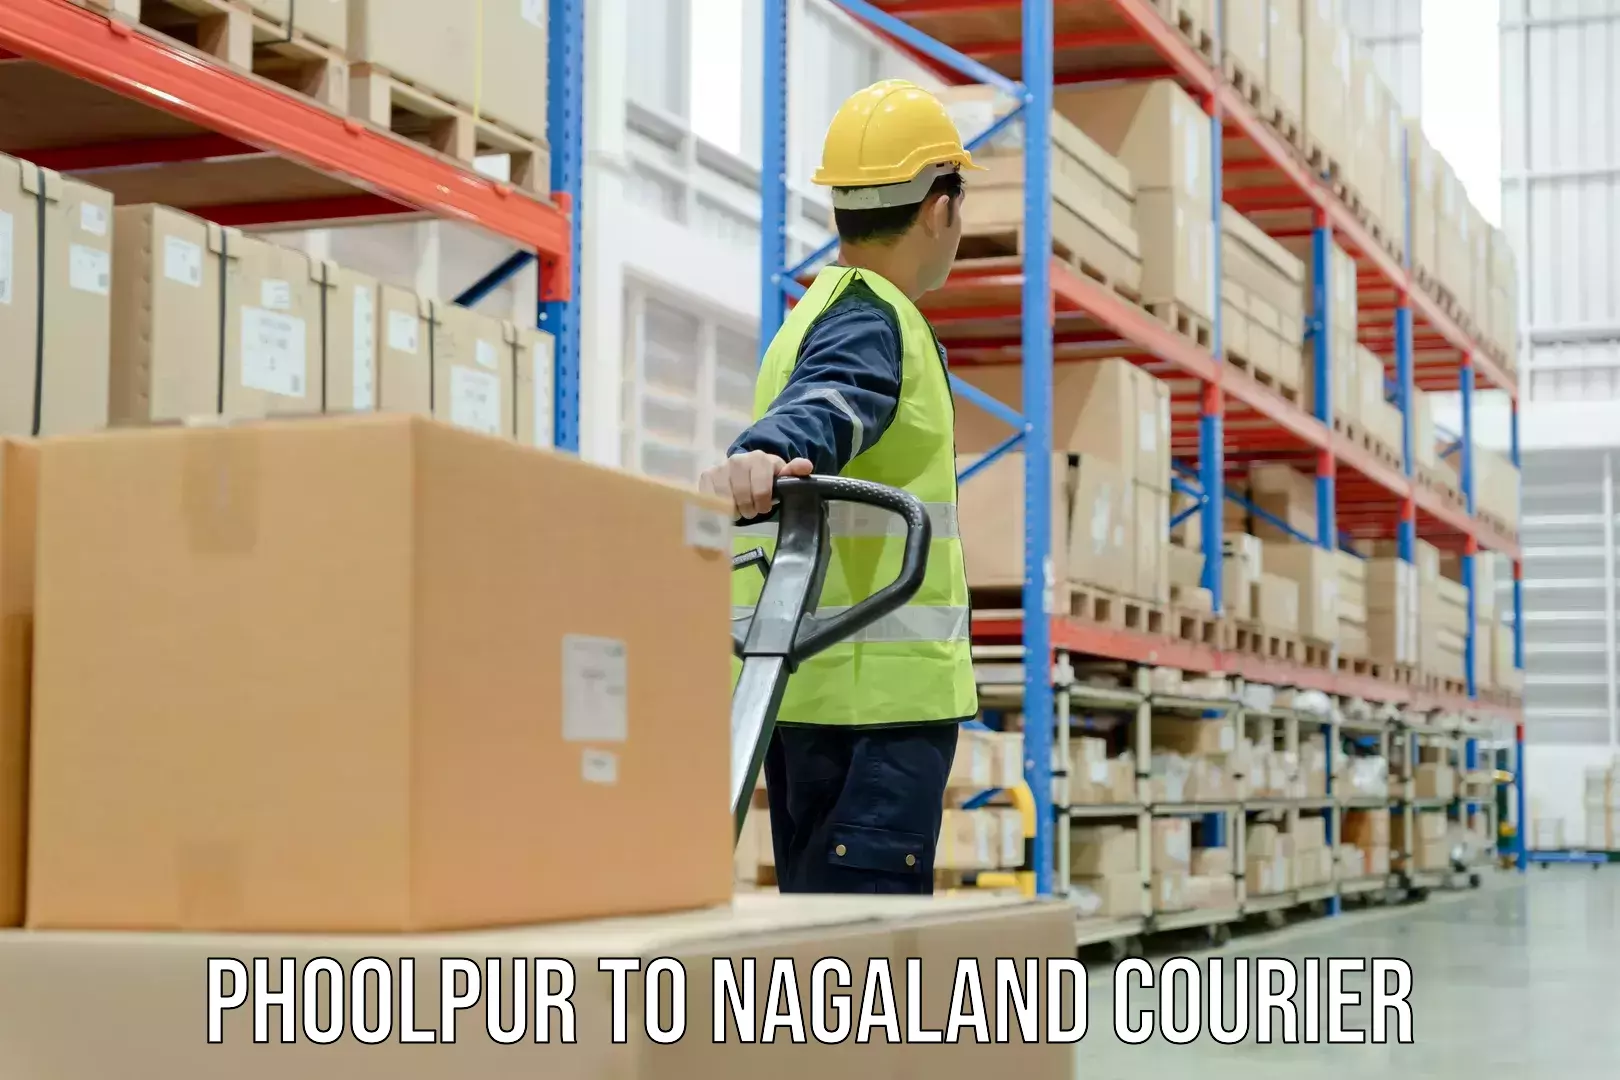 Parcel service for businesses Phoolpur to Nagaland